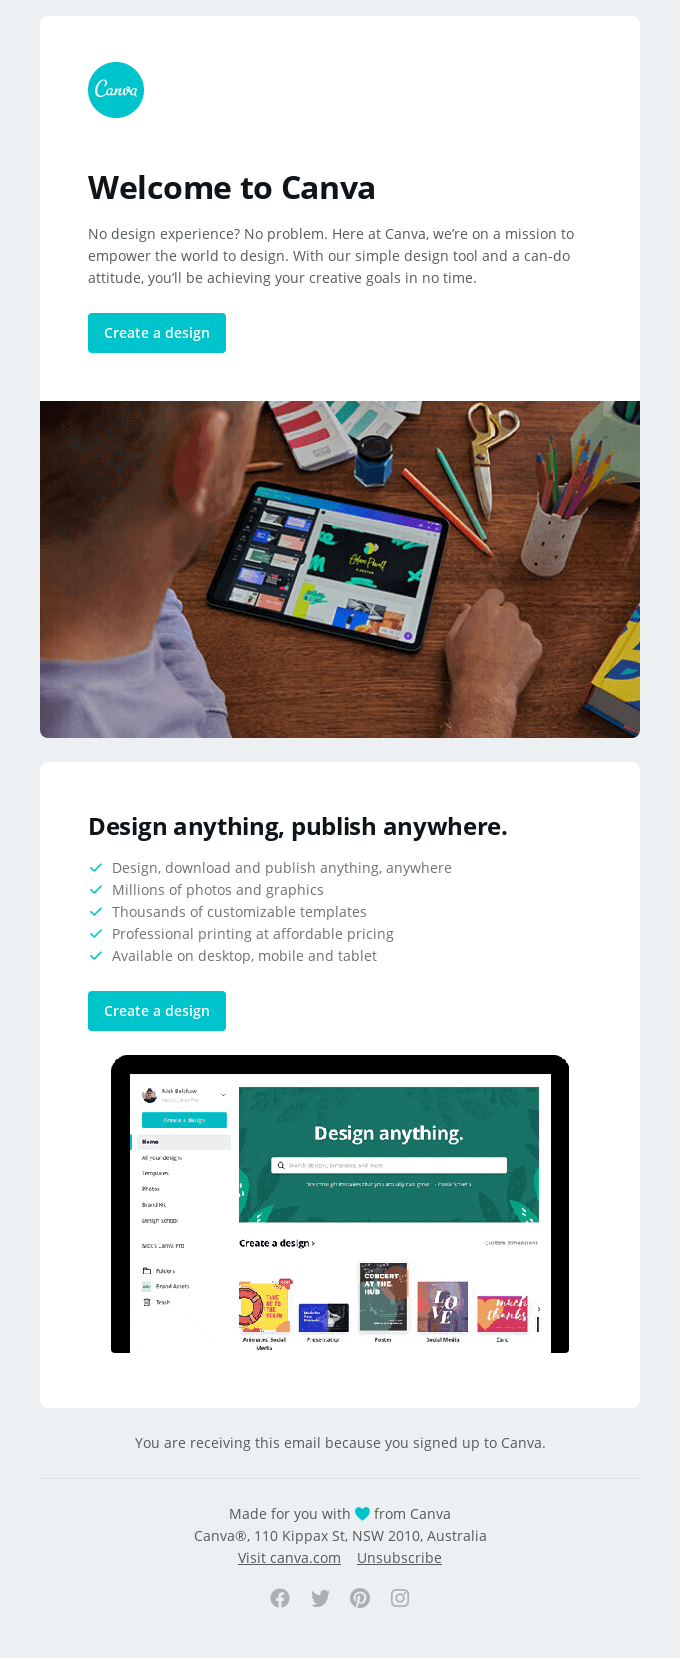 Welcome to Canva